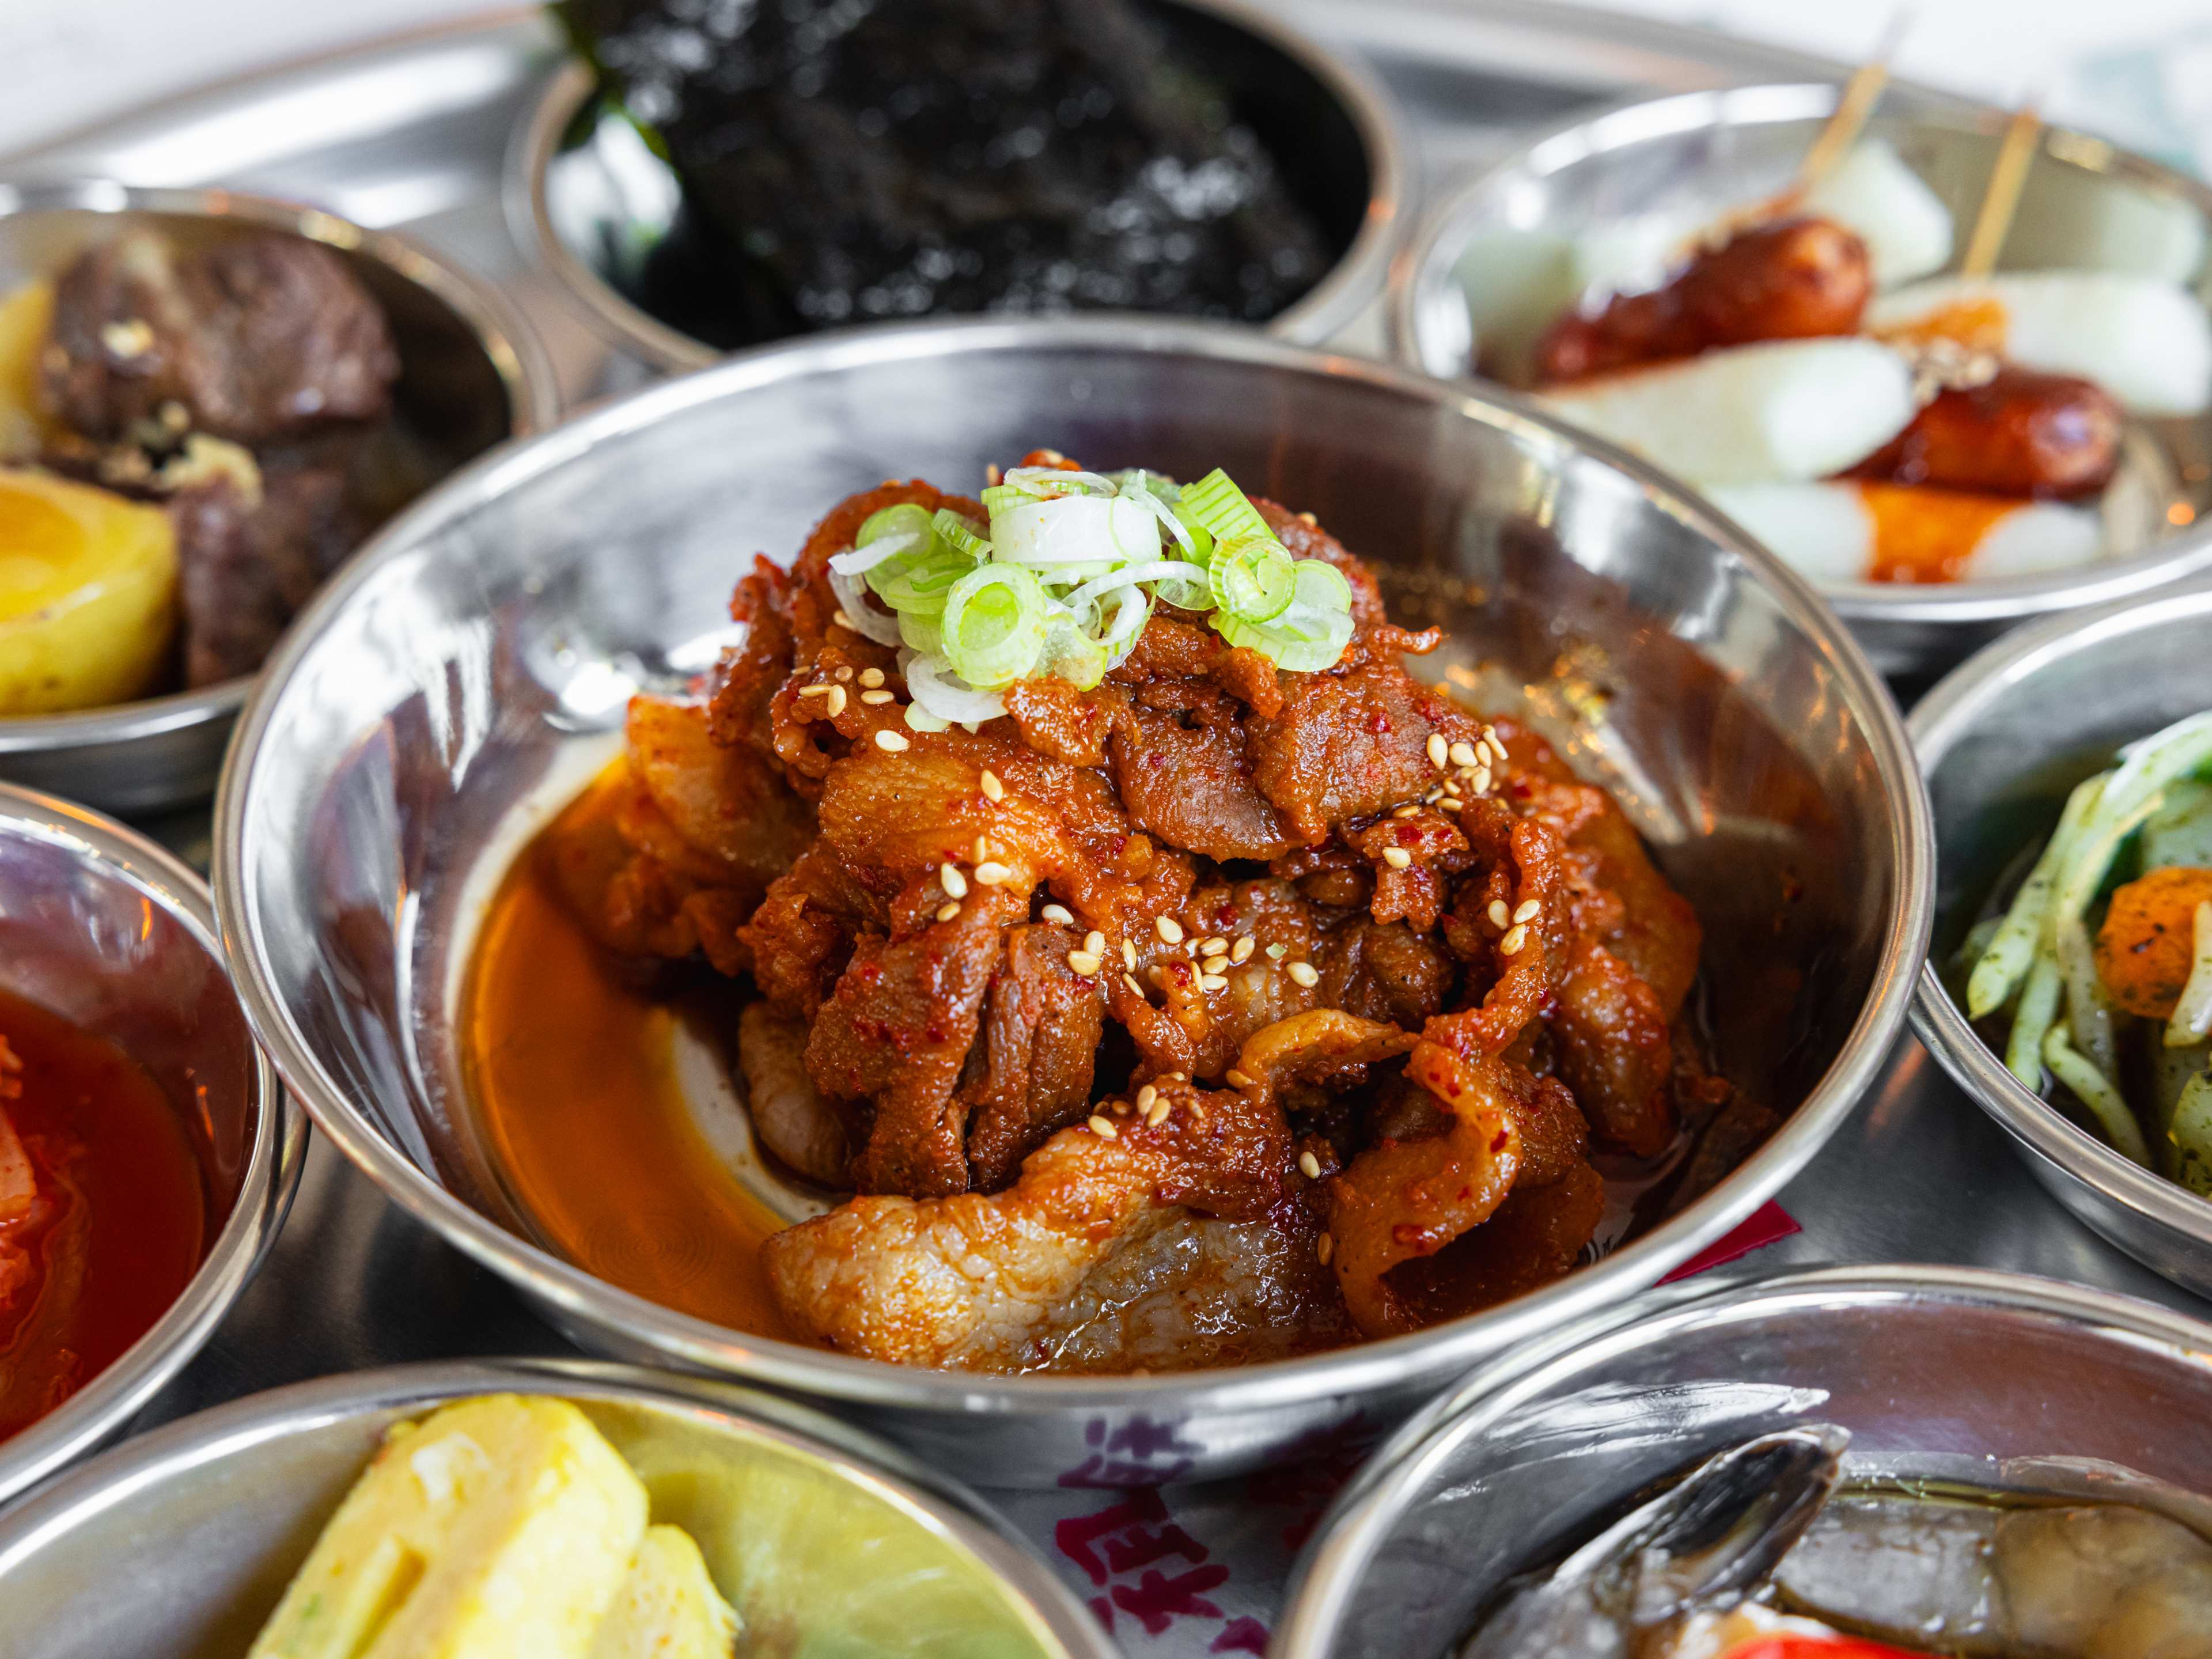 A small pile of spicy pork in a metal bowl surrounded by various sides.